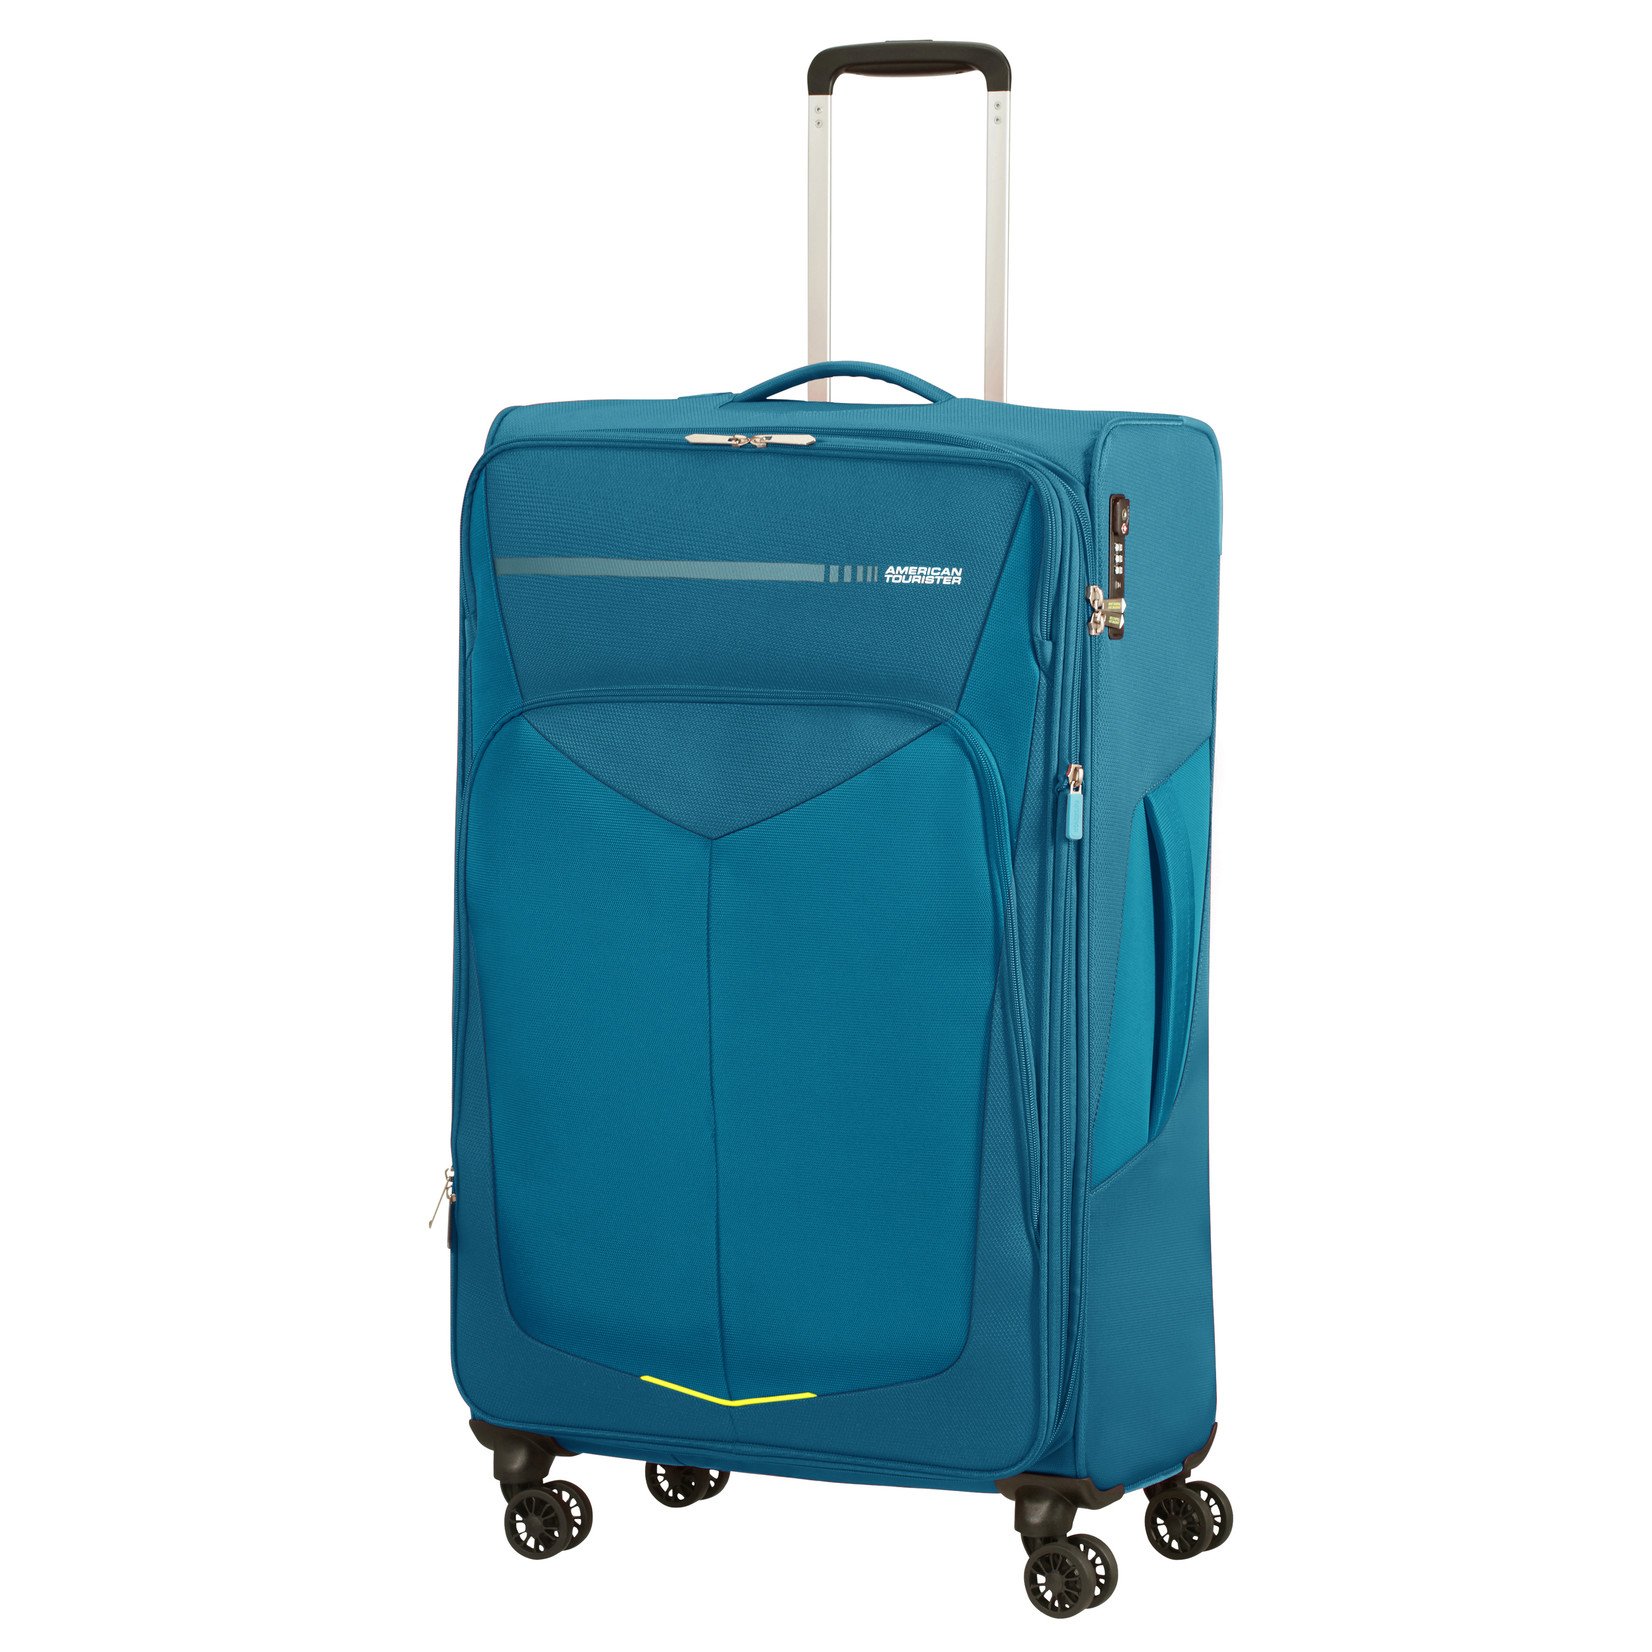 American Tourister American Tourister Summerfunk spinner 79- teal